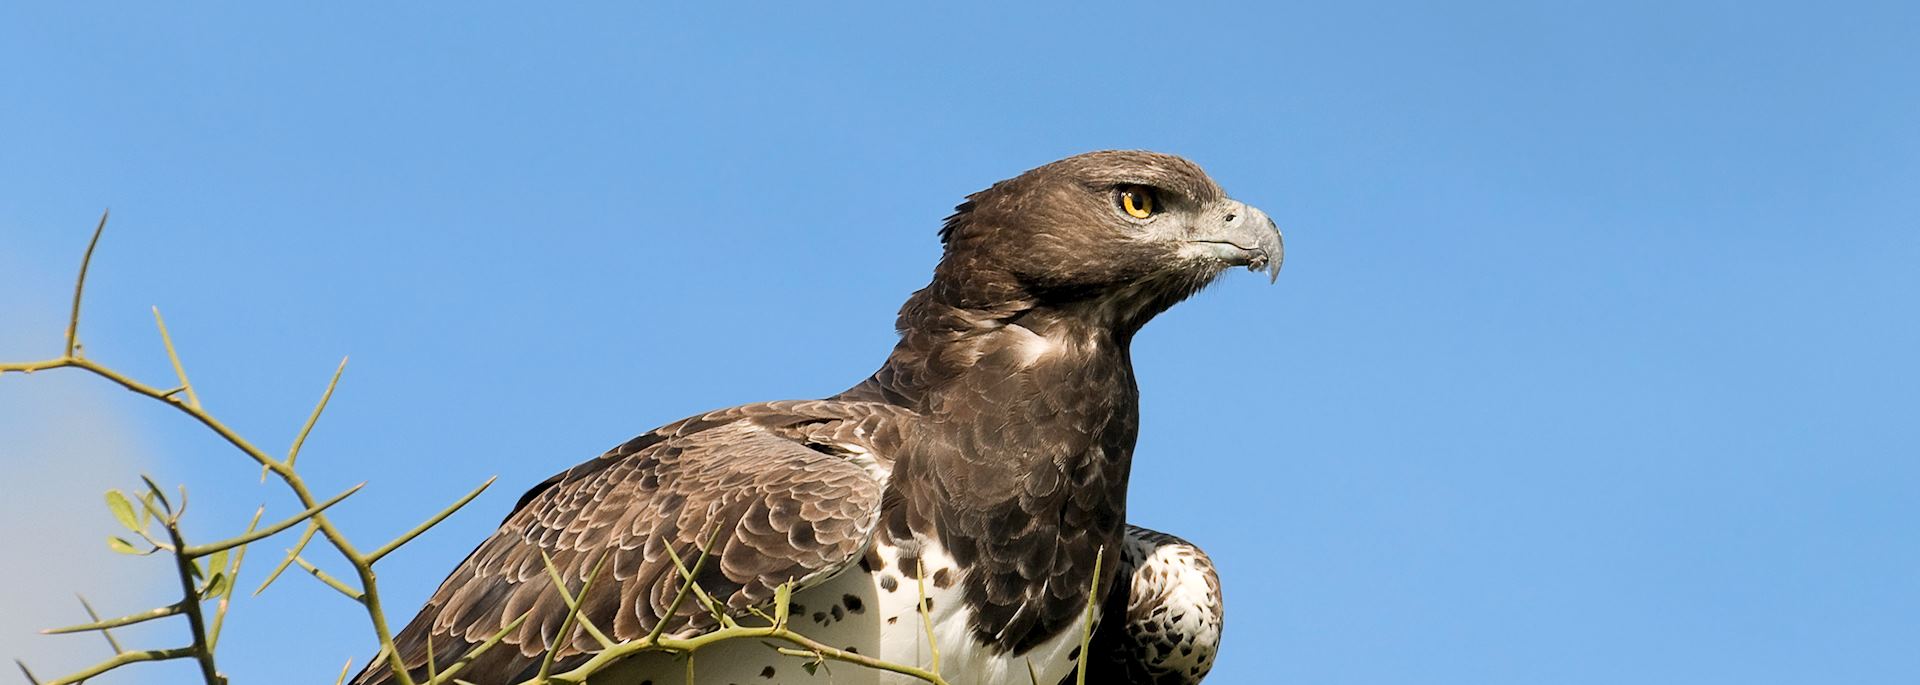 Martial eagle, Viphya Forest Mountains